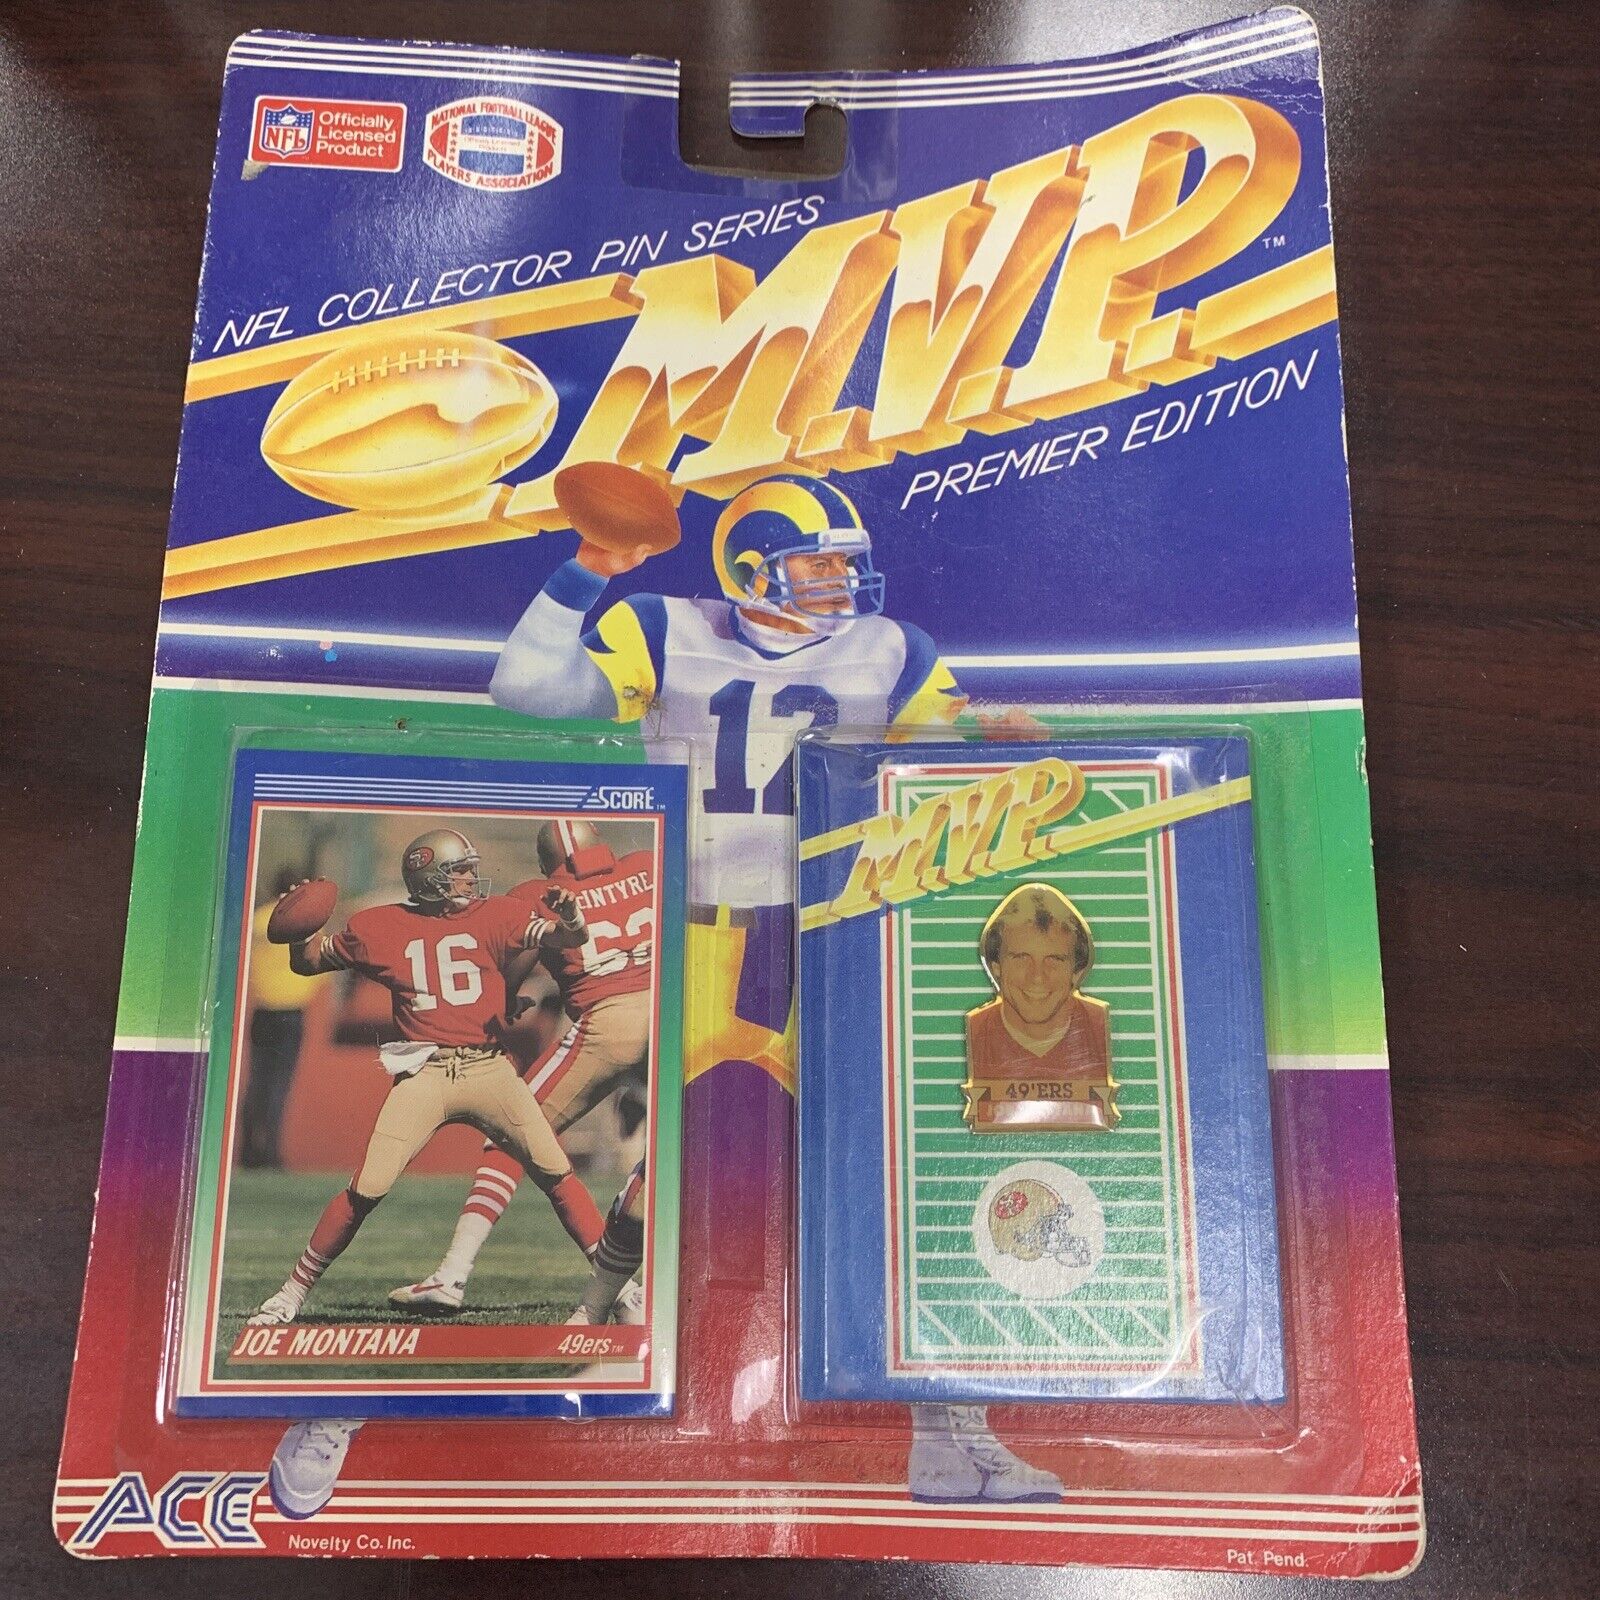 Roger Craig Nfl Collector Pin Series Mvp Premier Edition